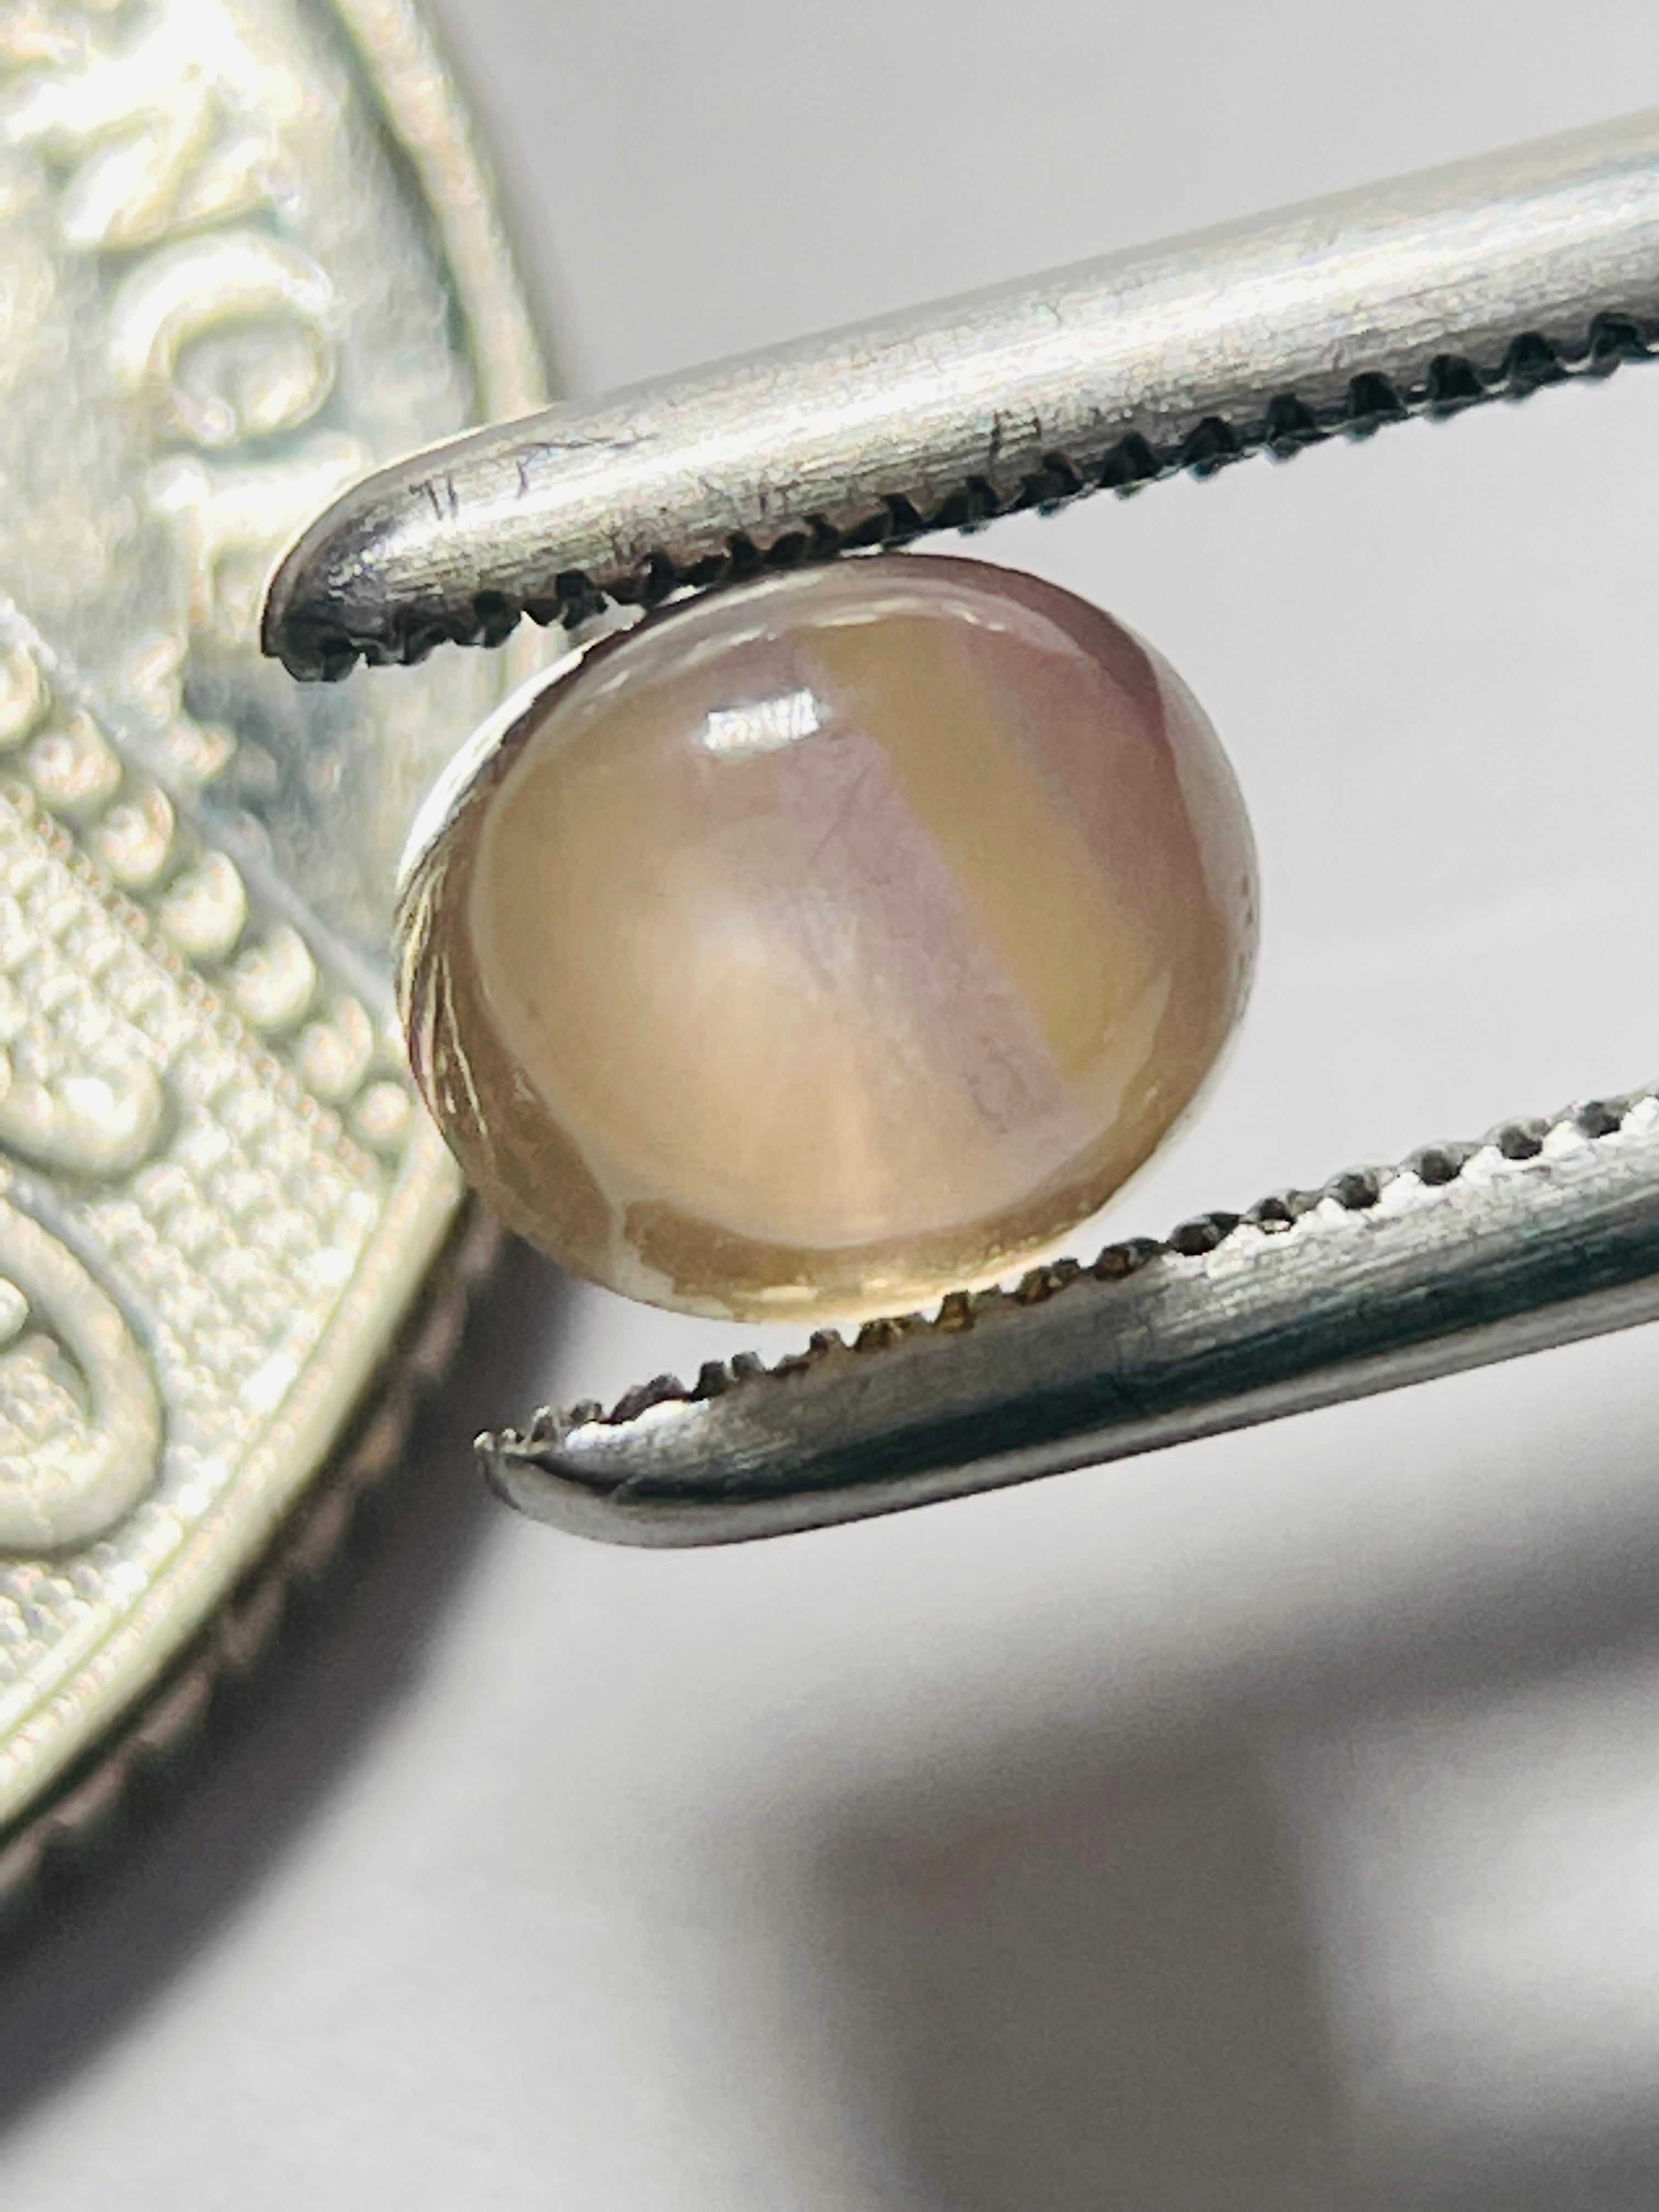 1.32Ct Umba Sapphire Cabochon. Tanzania Untreated Unheated. Incredible Banding On This One